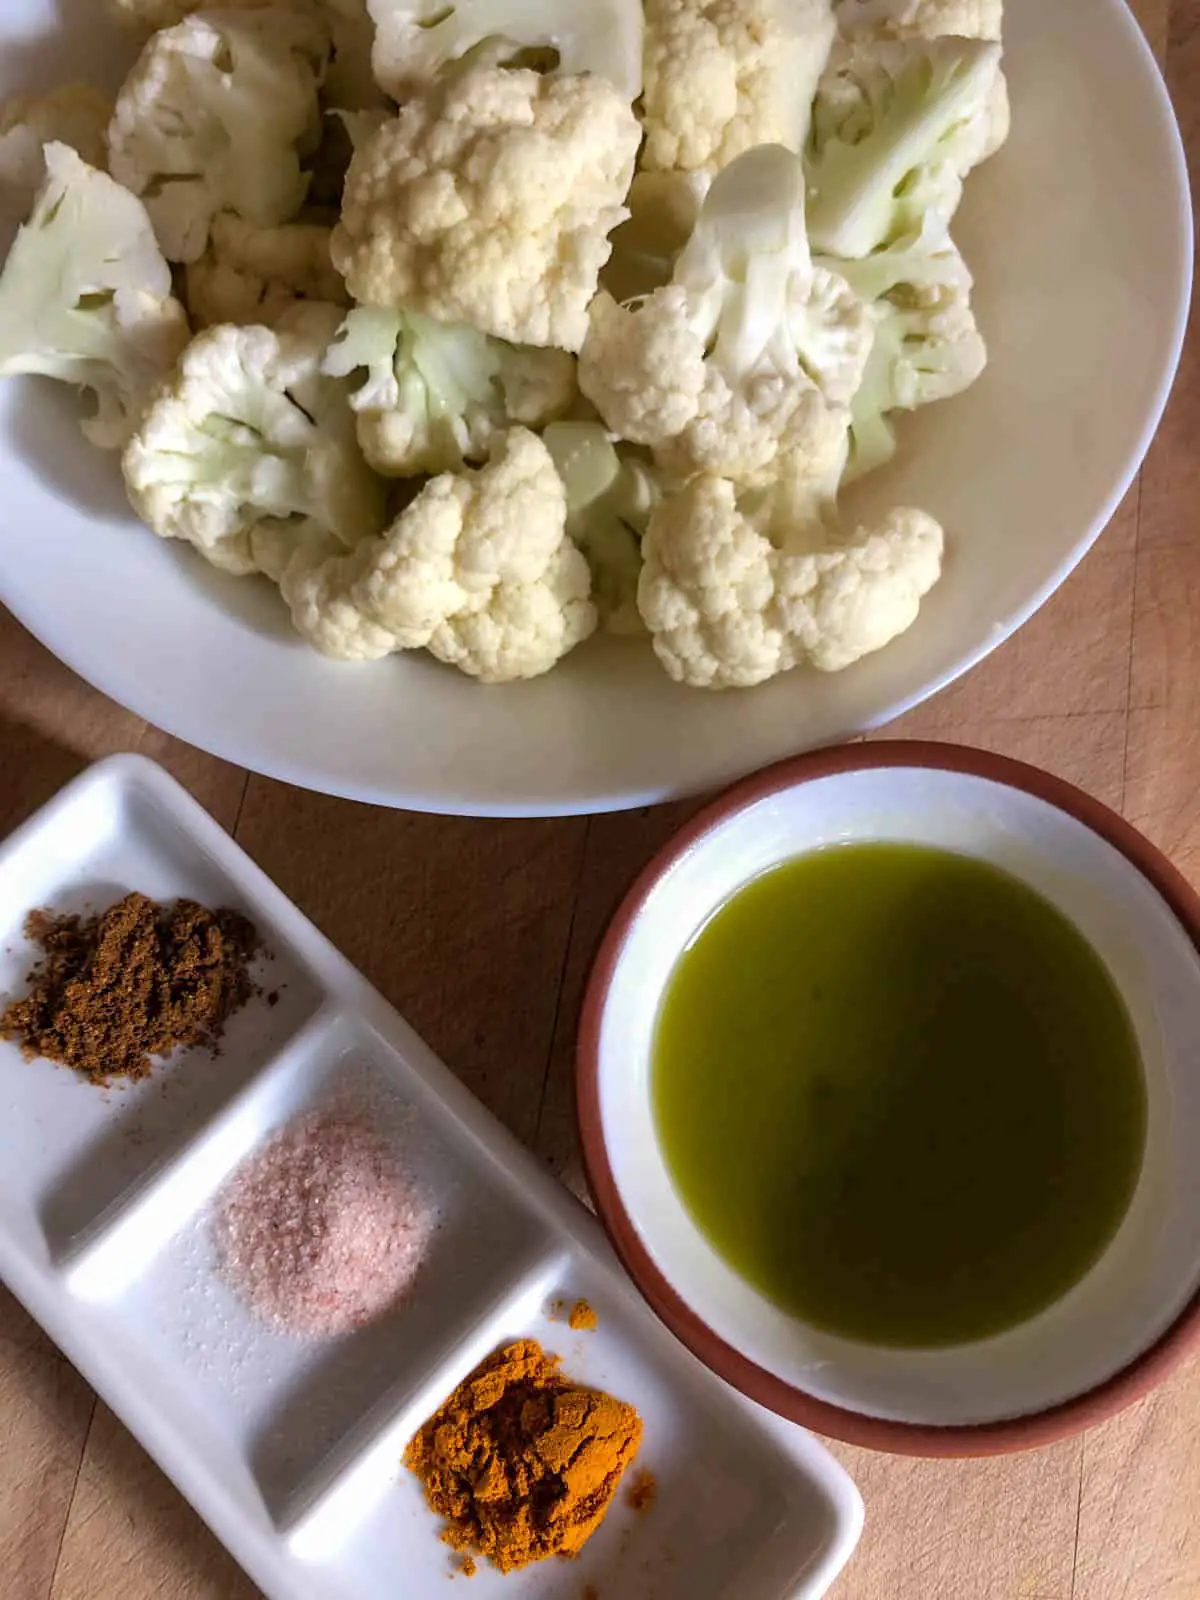 Cauliflower florets in a white bowl, olive oil in a small terracotta bowl, and garam masala, turmeric, and pink salt in a white dish.